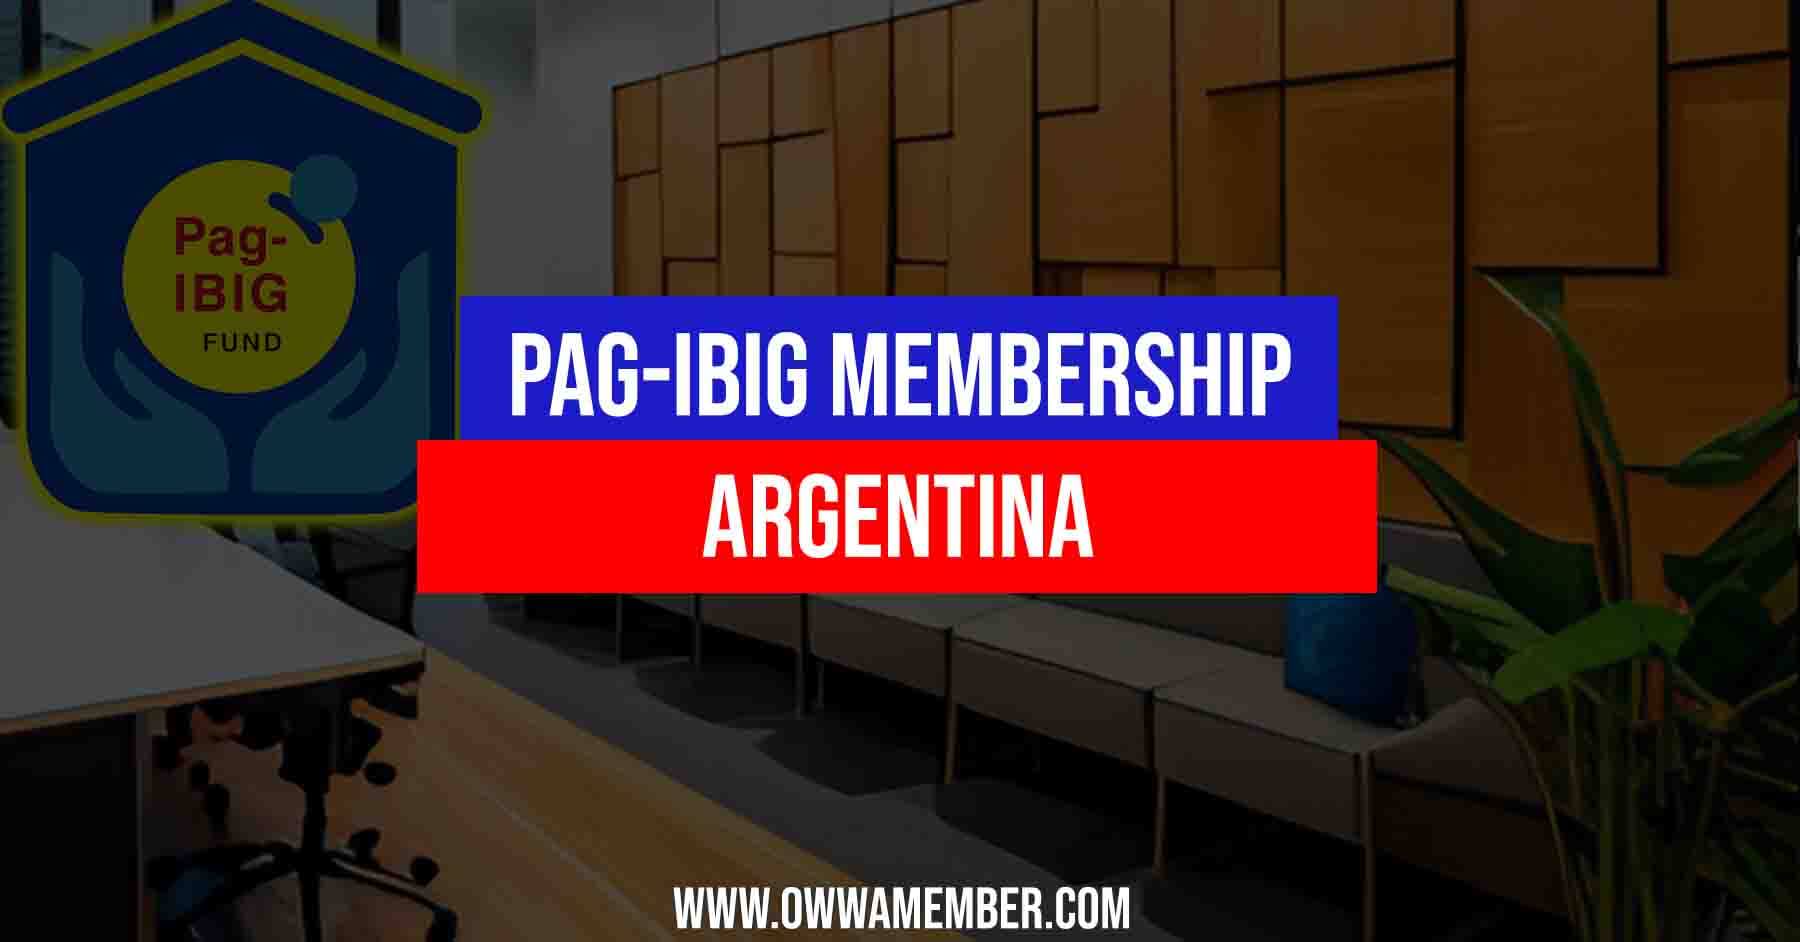 how to apply pagibig membership in argentina